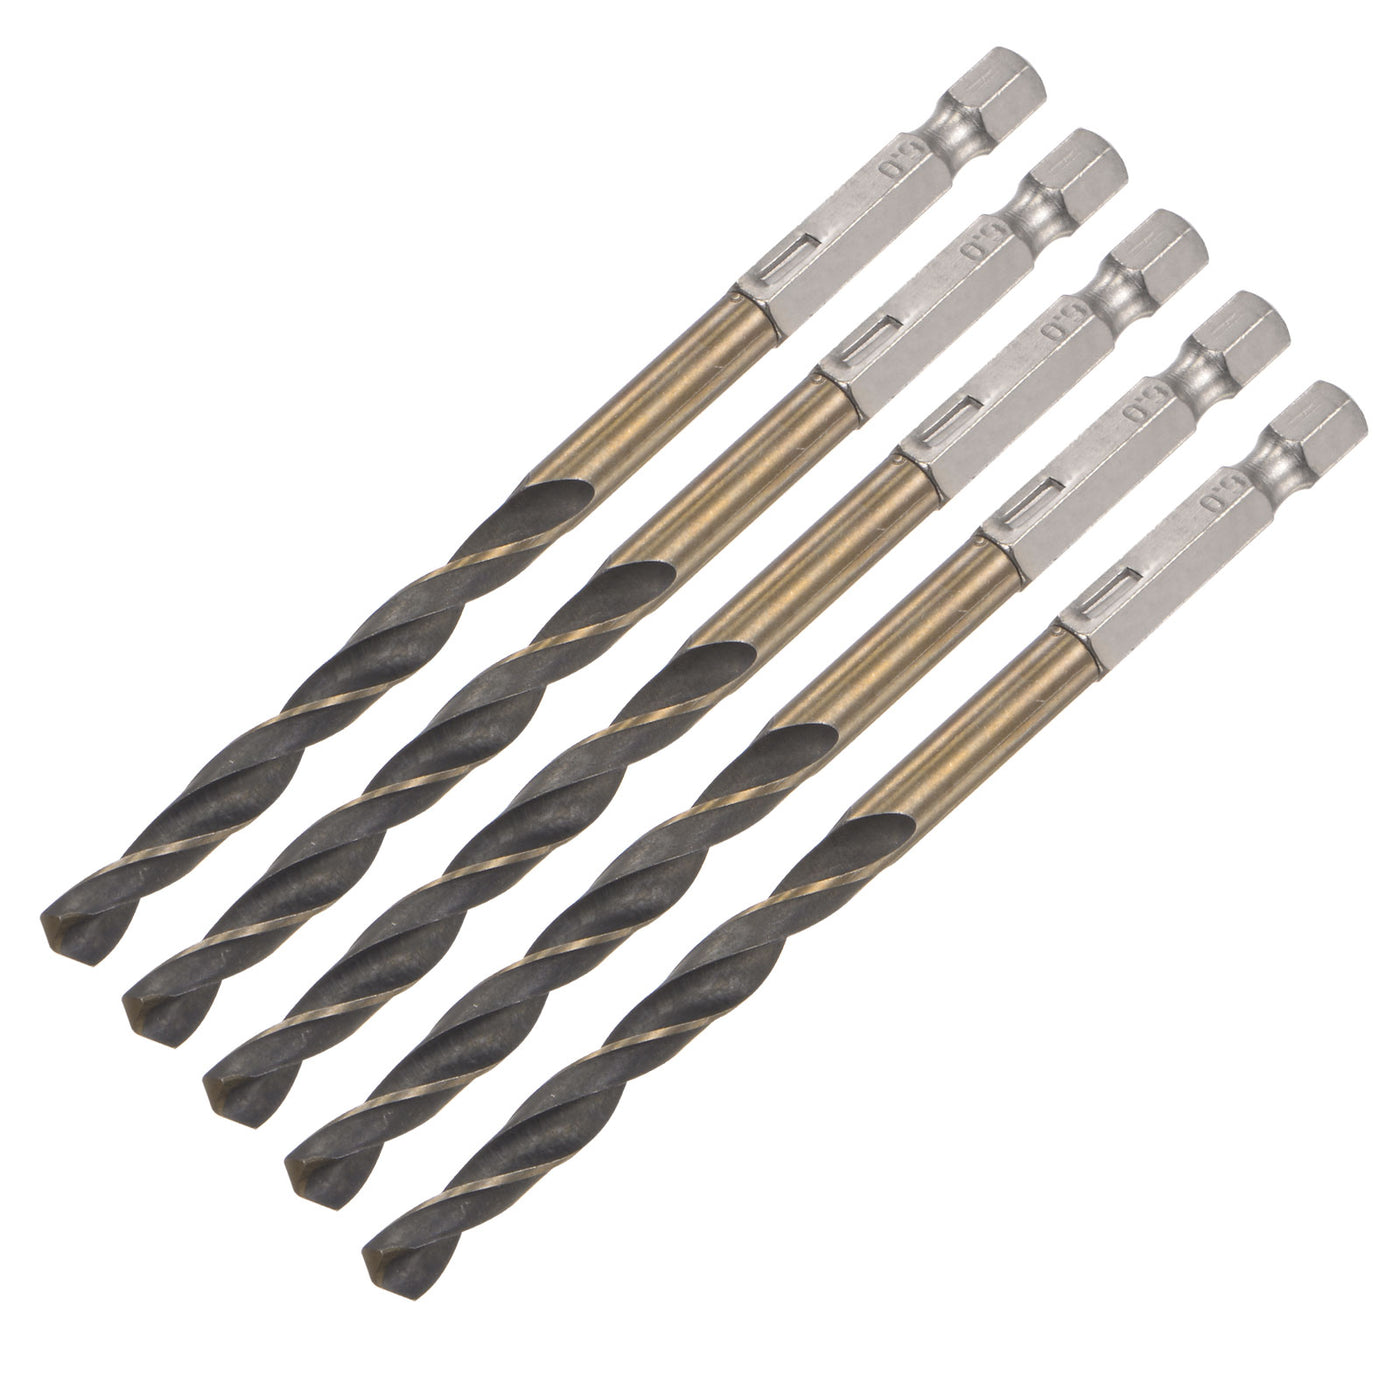 uxcell Uxcell 5Pcs 6mm High Speed Steel Twist Drill Bit with Hex Shank 114mm Length